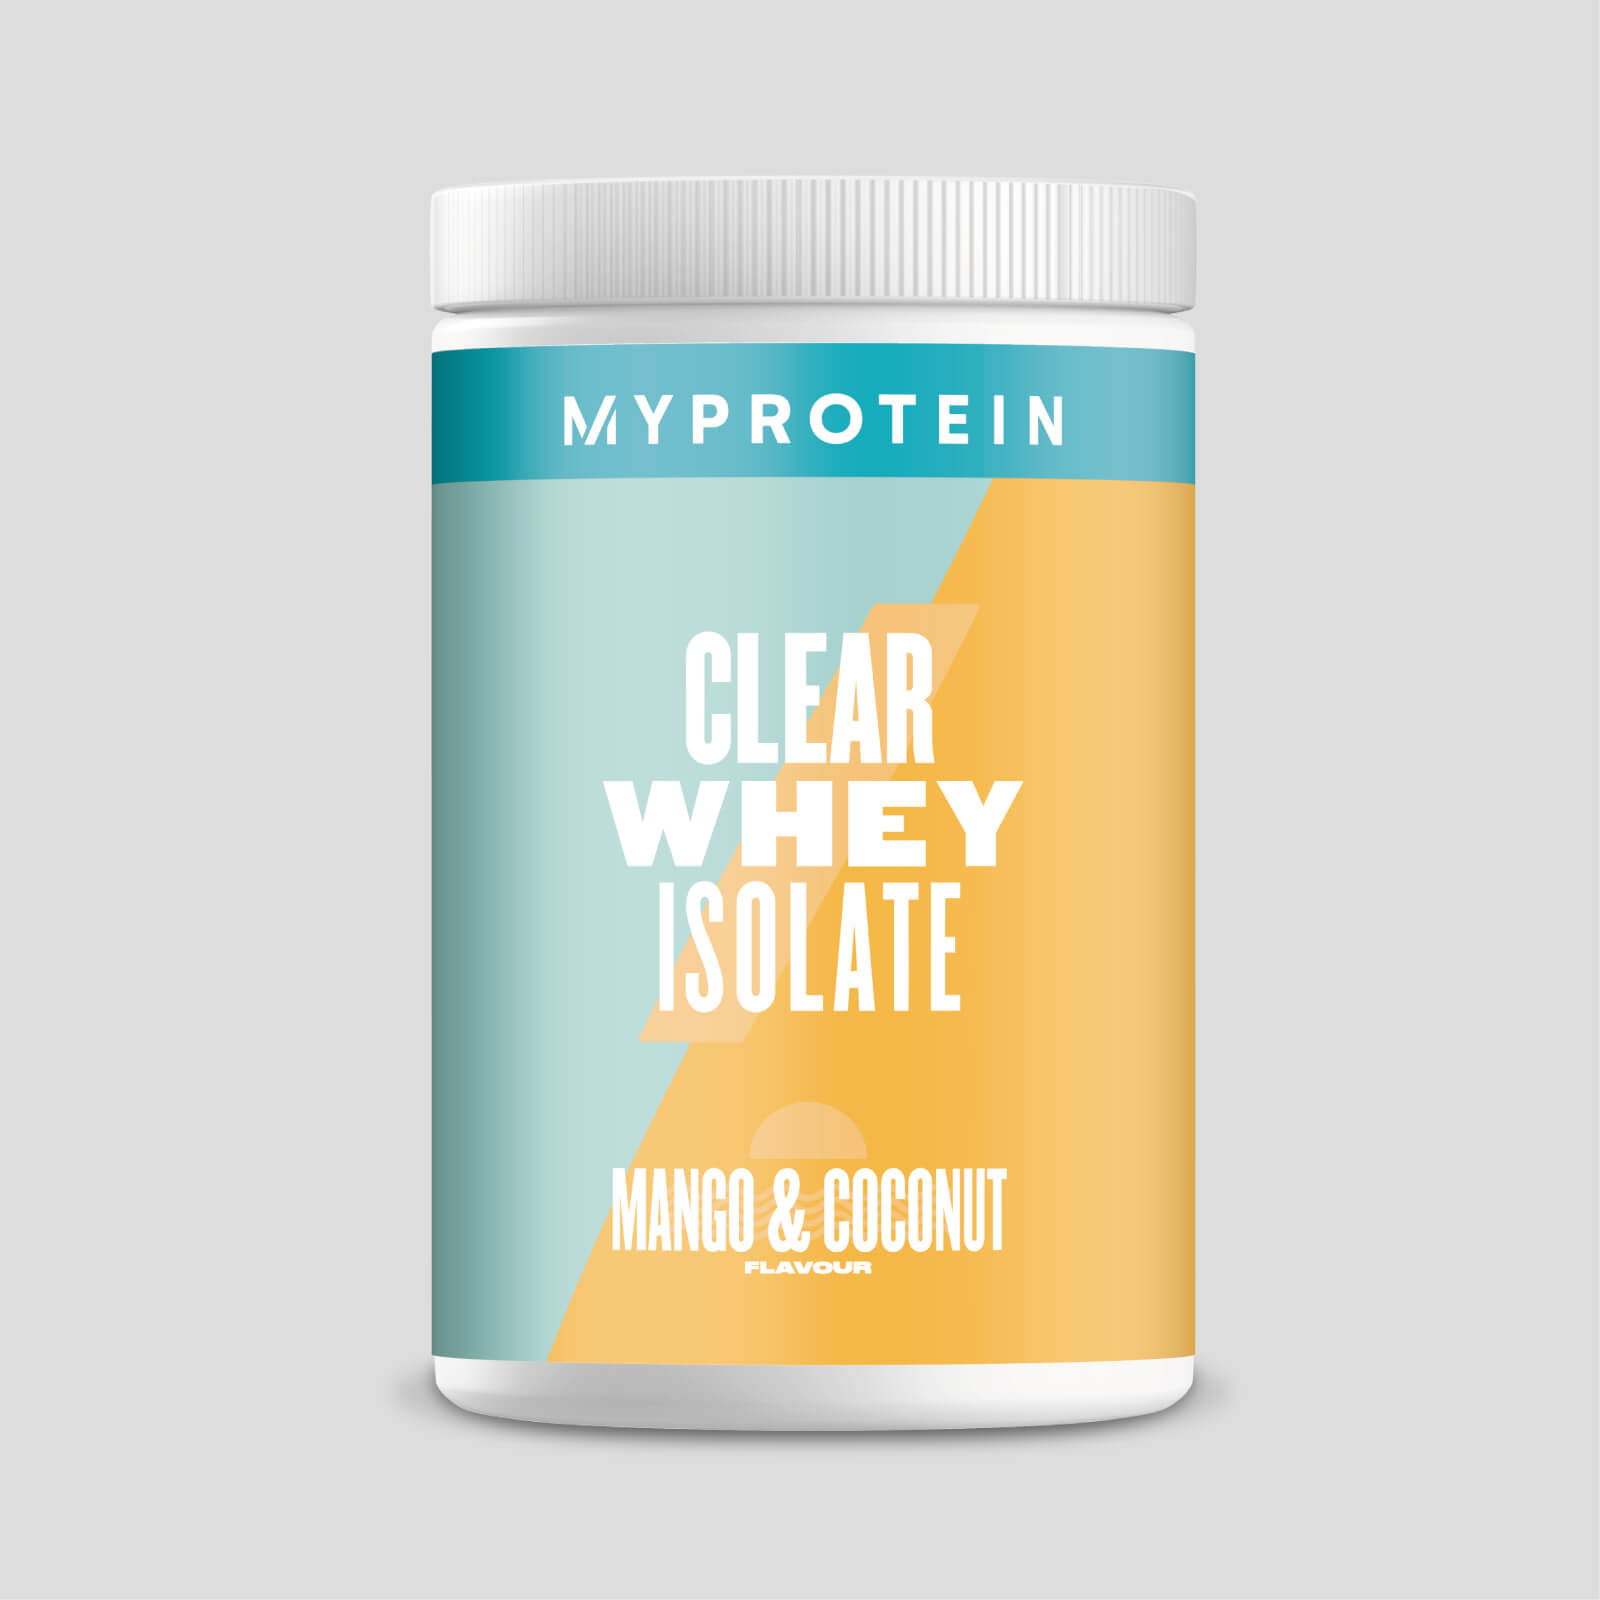 Myprotein Clear Whey Isolate - 20servings - Mango & Coconut